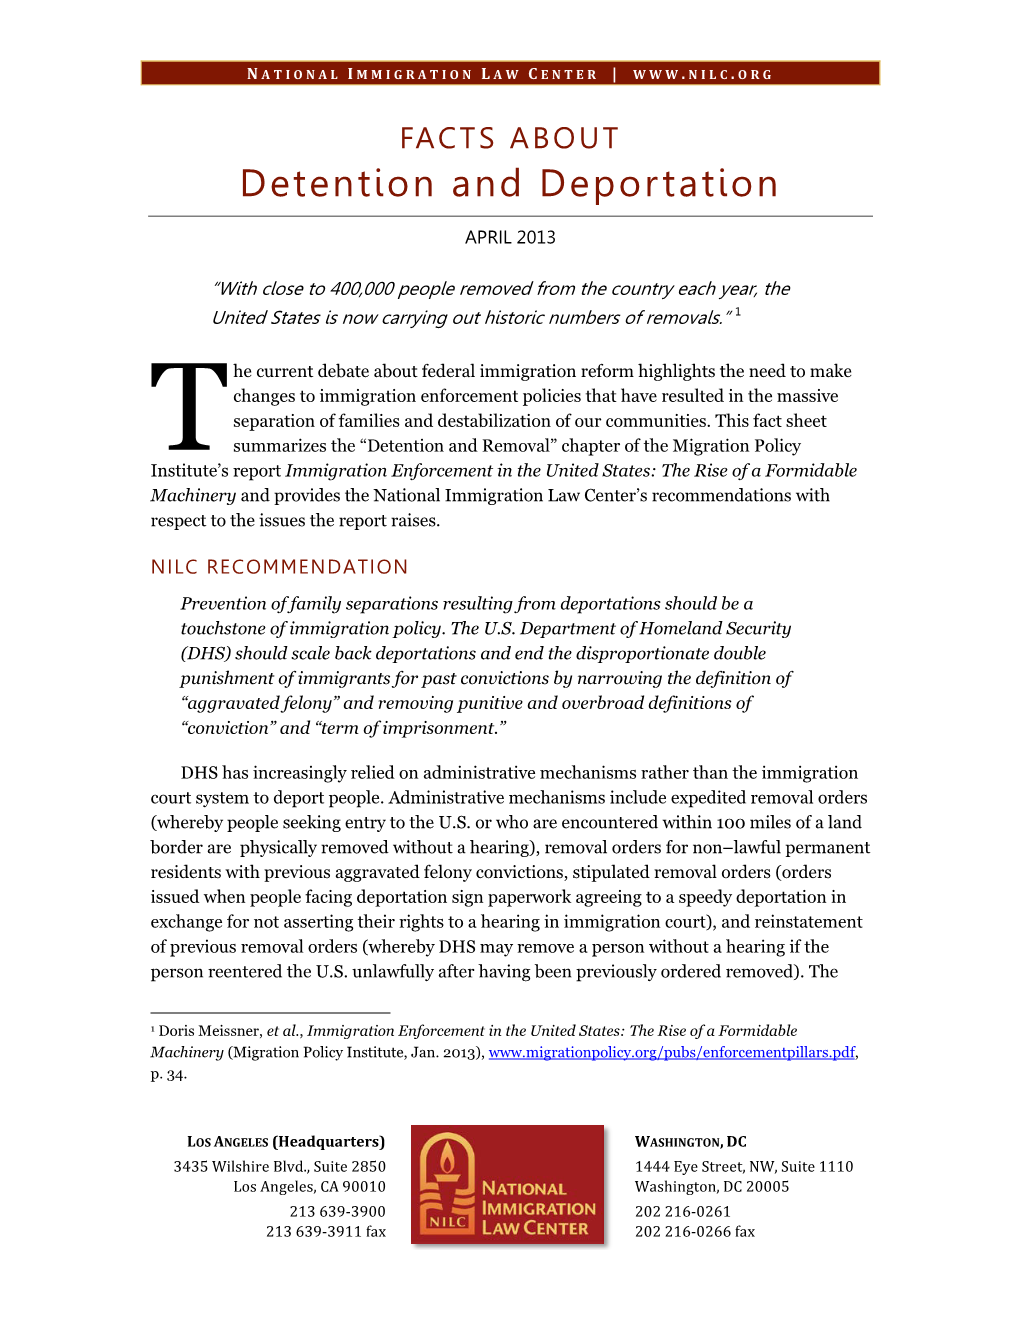 FACTS ABOUT Detention and Deportation